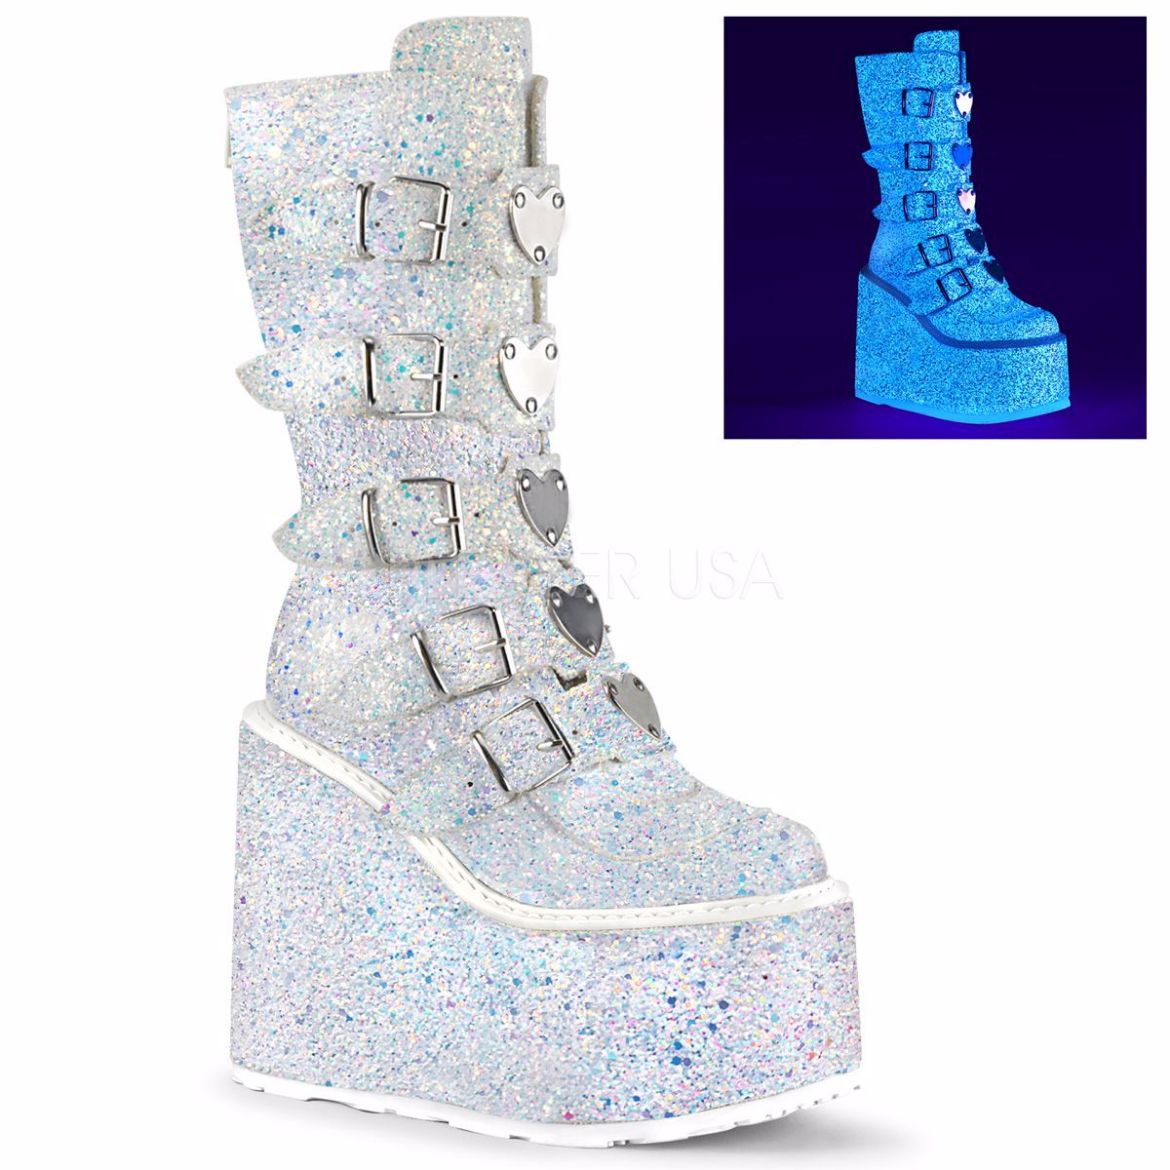 Product image of Demonia SWING-230G White Multicolour Glitter 5 1/2 inch Platform Mid-Calf Boot With  5 Buckles Straps Back Metal Zip